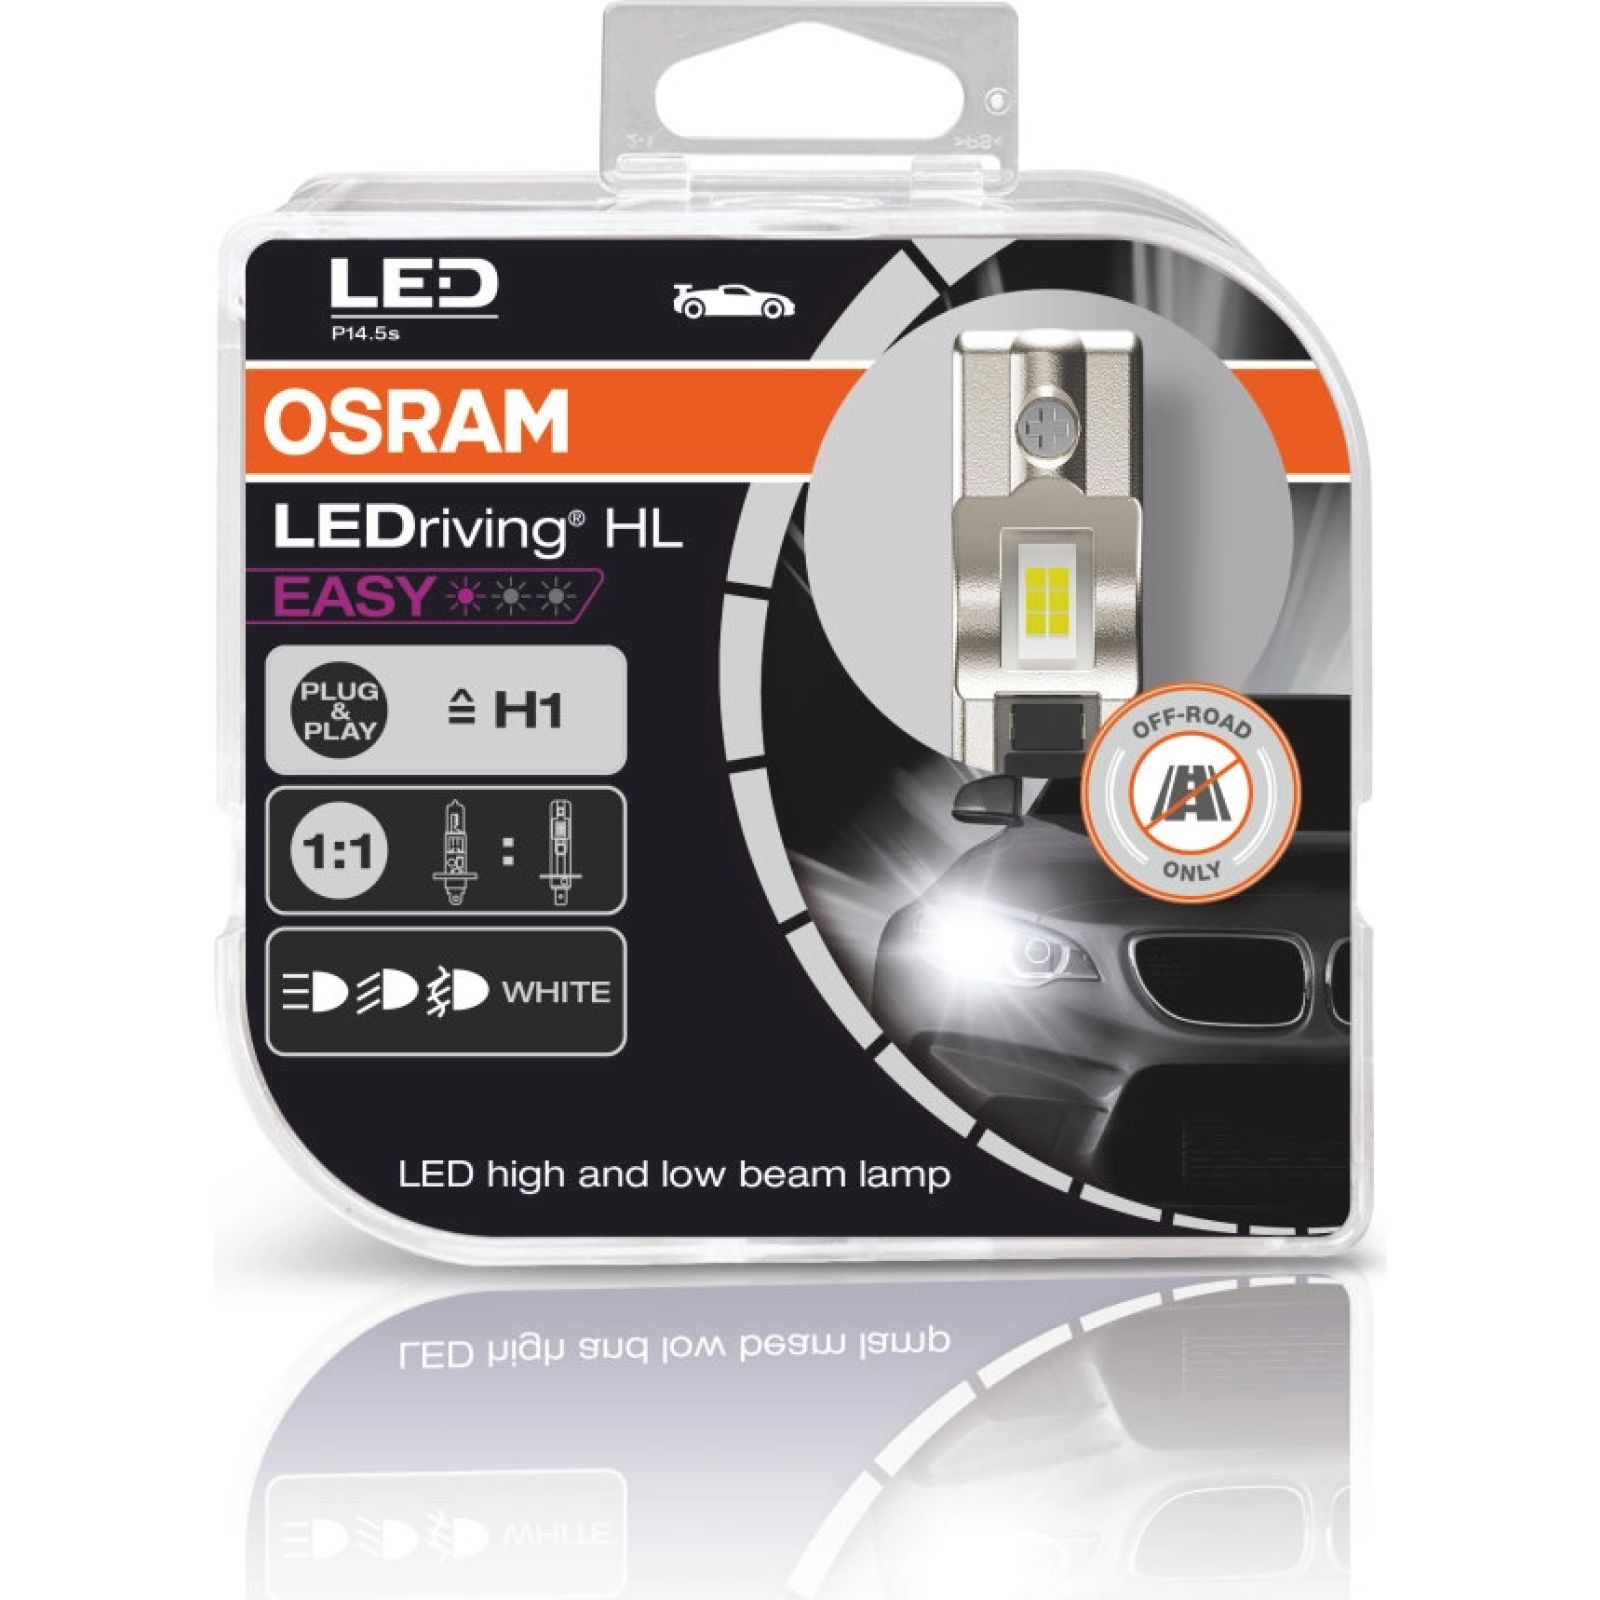 https://www.autoteile-store.at/img/product/osram-ledriving-r-hl-easy-h1-12v-9w-p145s-6500k-white-2st-64150dwesy-hcb-643161/aed132631b073d166e39c6371a8daacb_1600.jpg